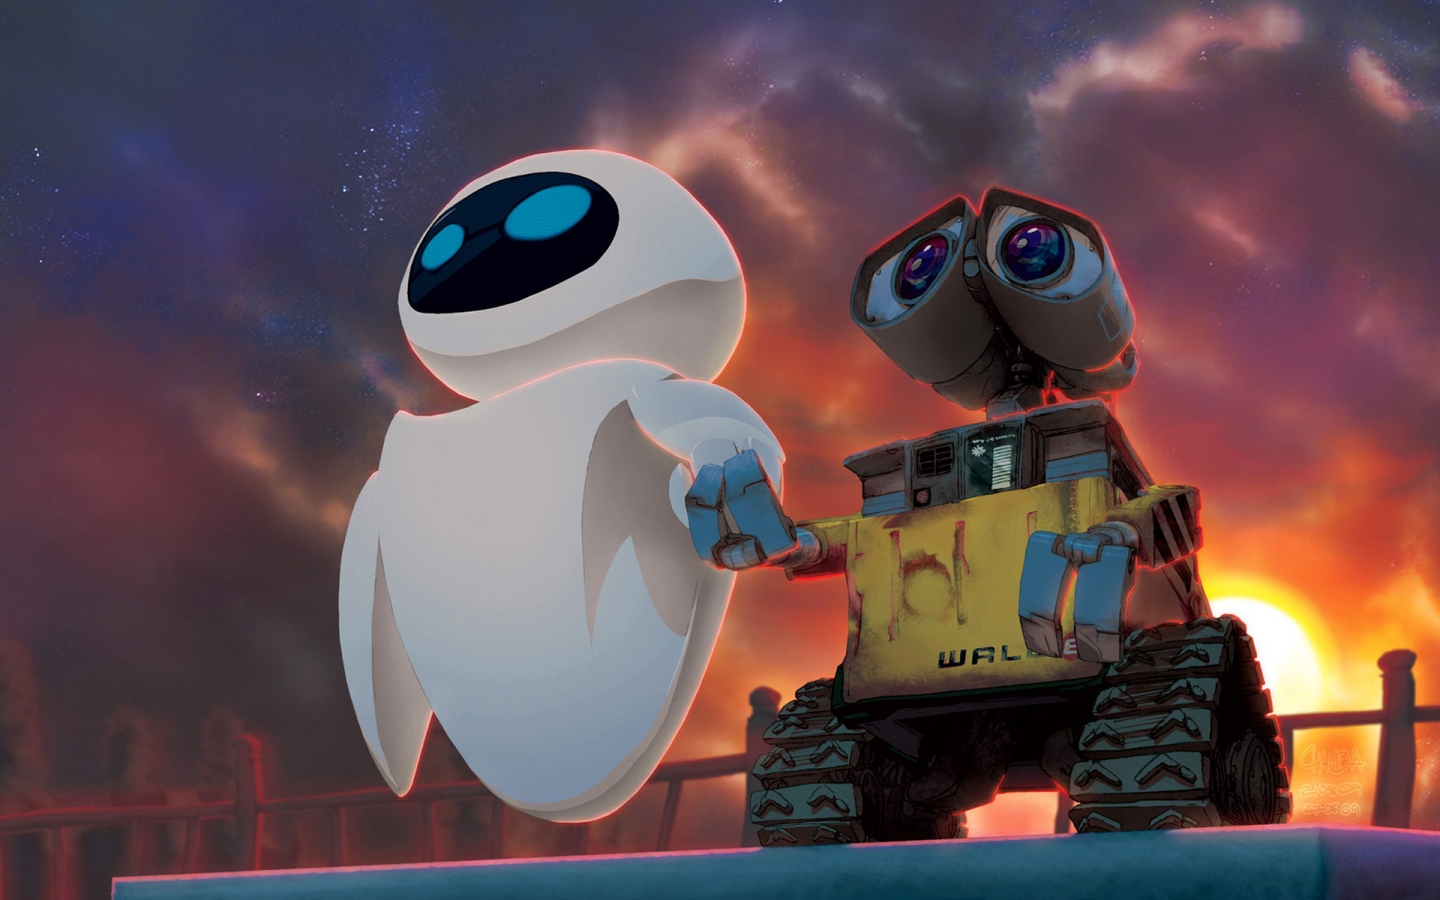 Walle Cartooned for 1440 x 900 widescreen resolution